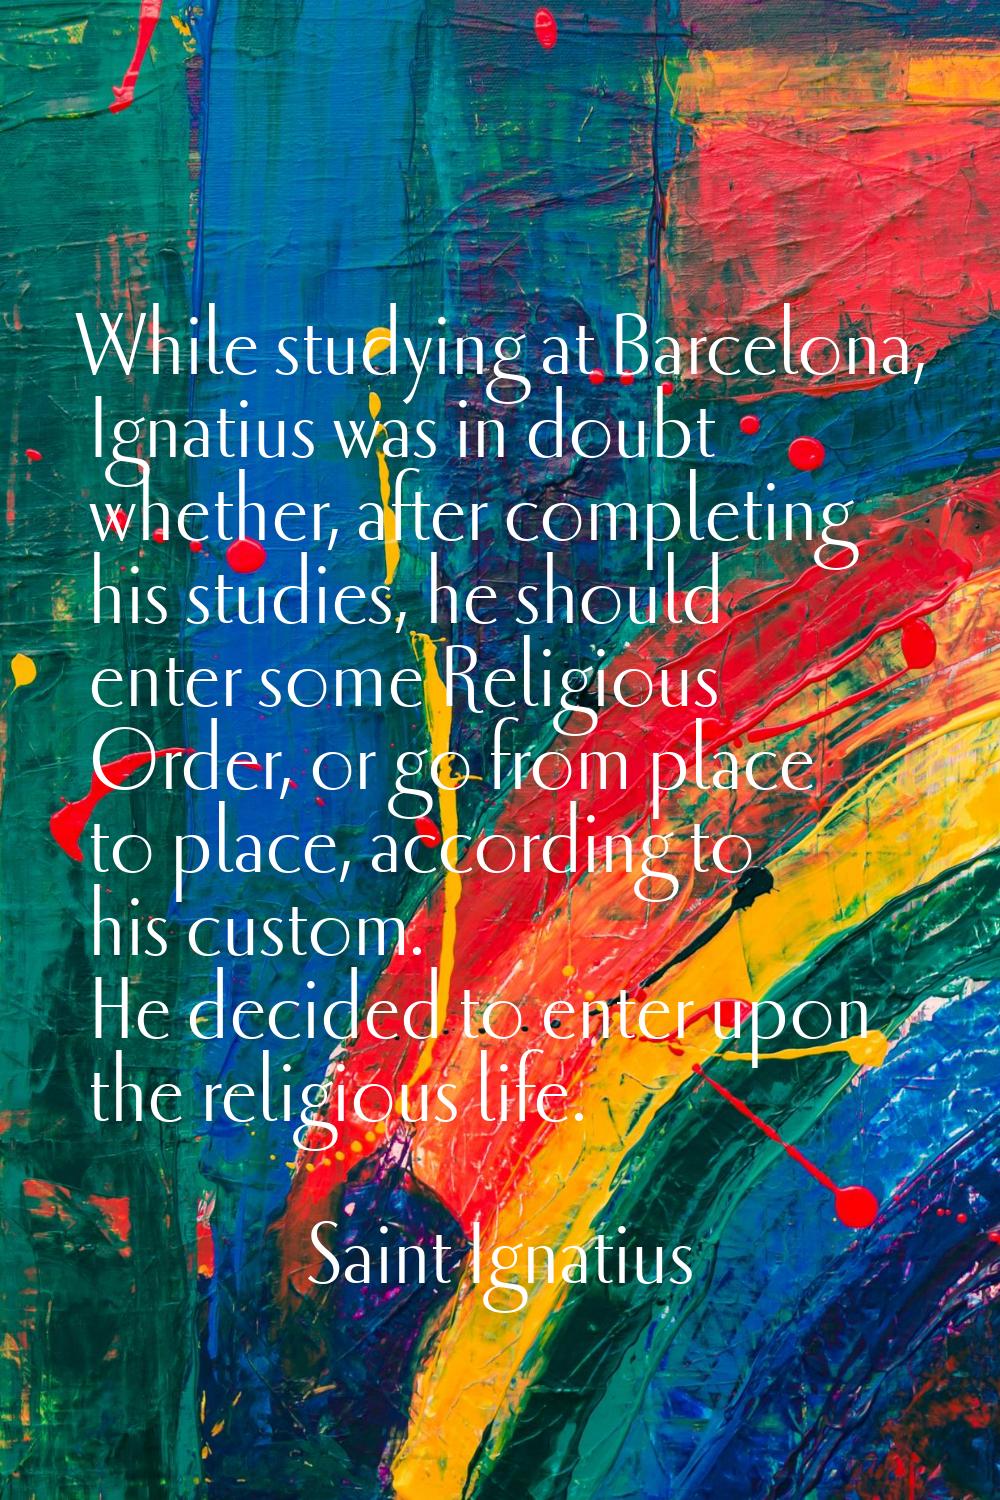 While studying at Barcelona, Ignatius was in doubt whether, after completing his studies, he should